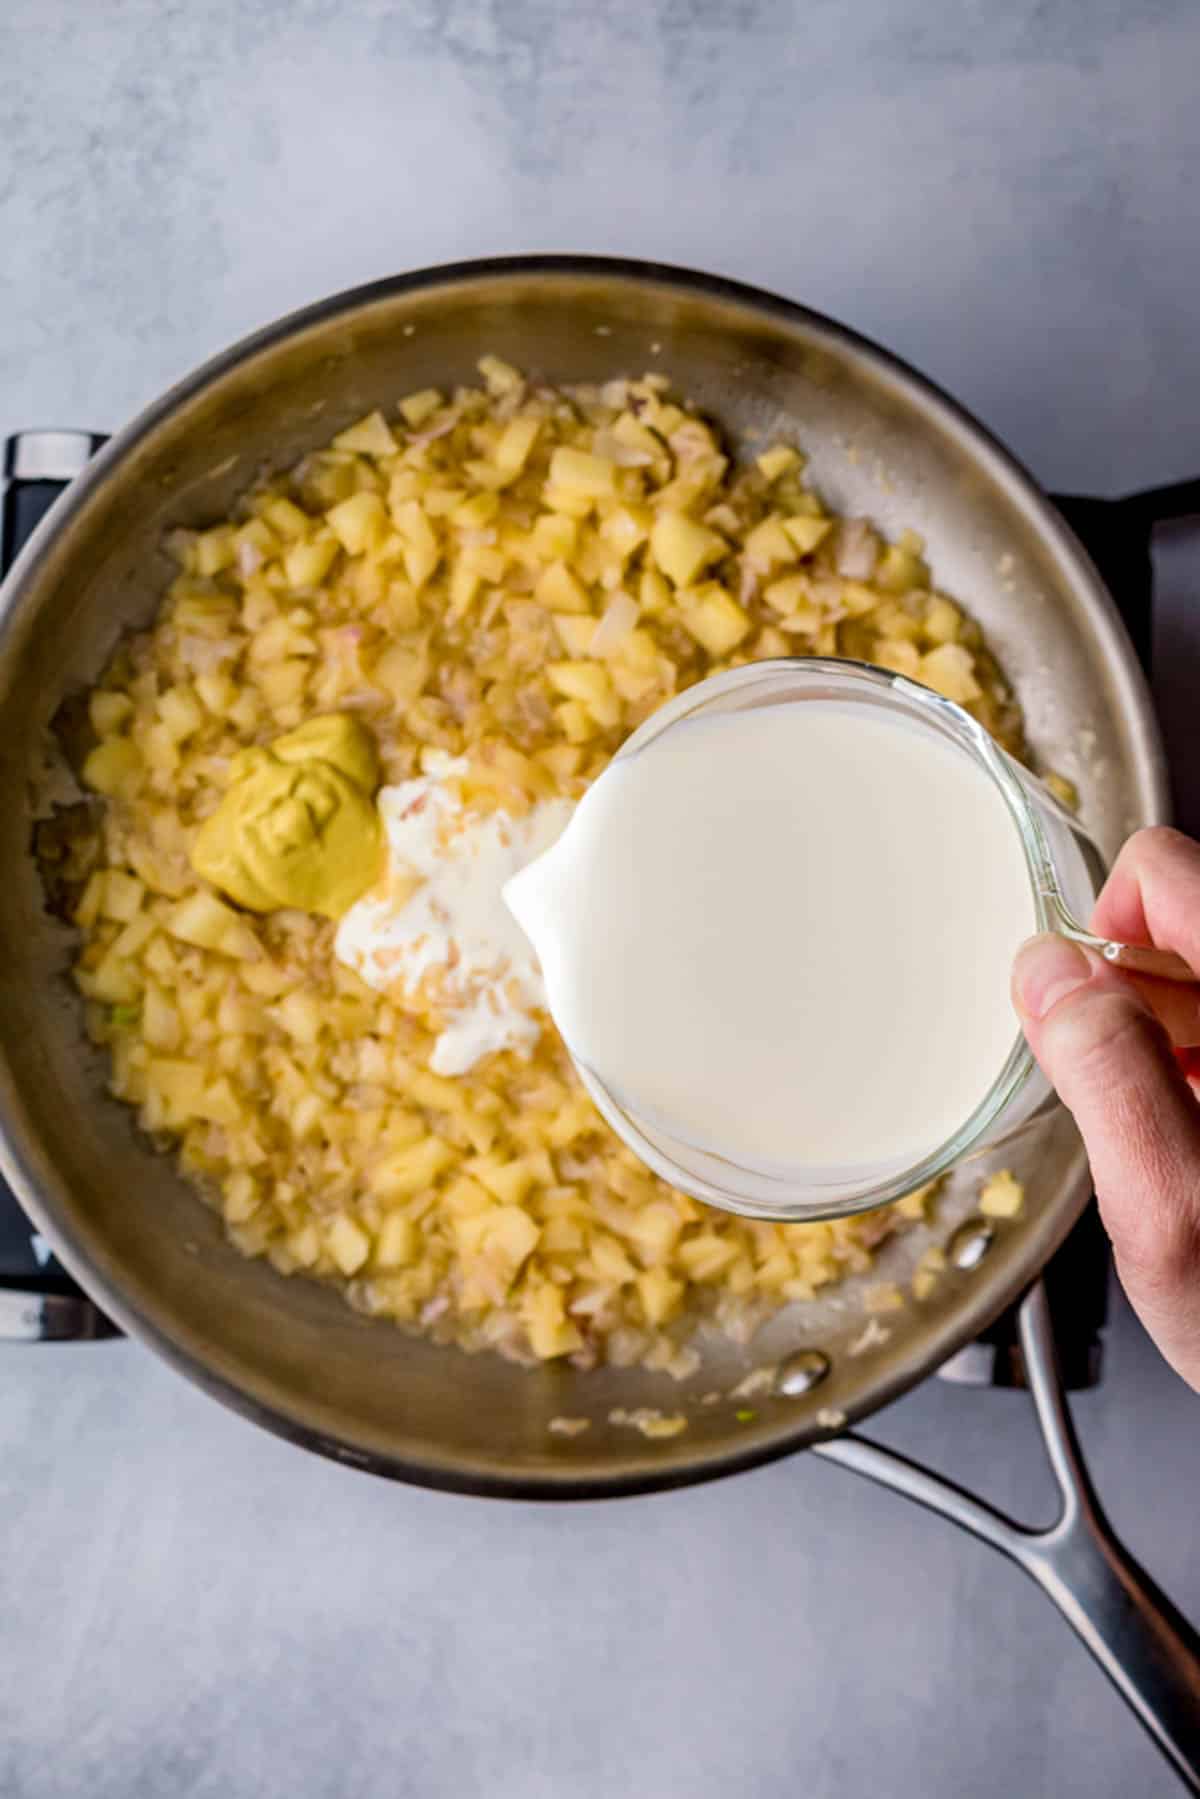 cream being poured into yellow mixture in a skillet